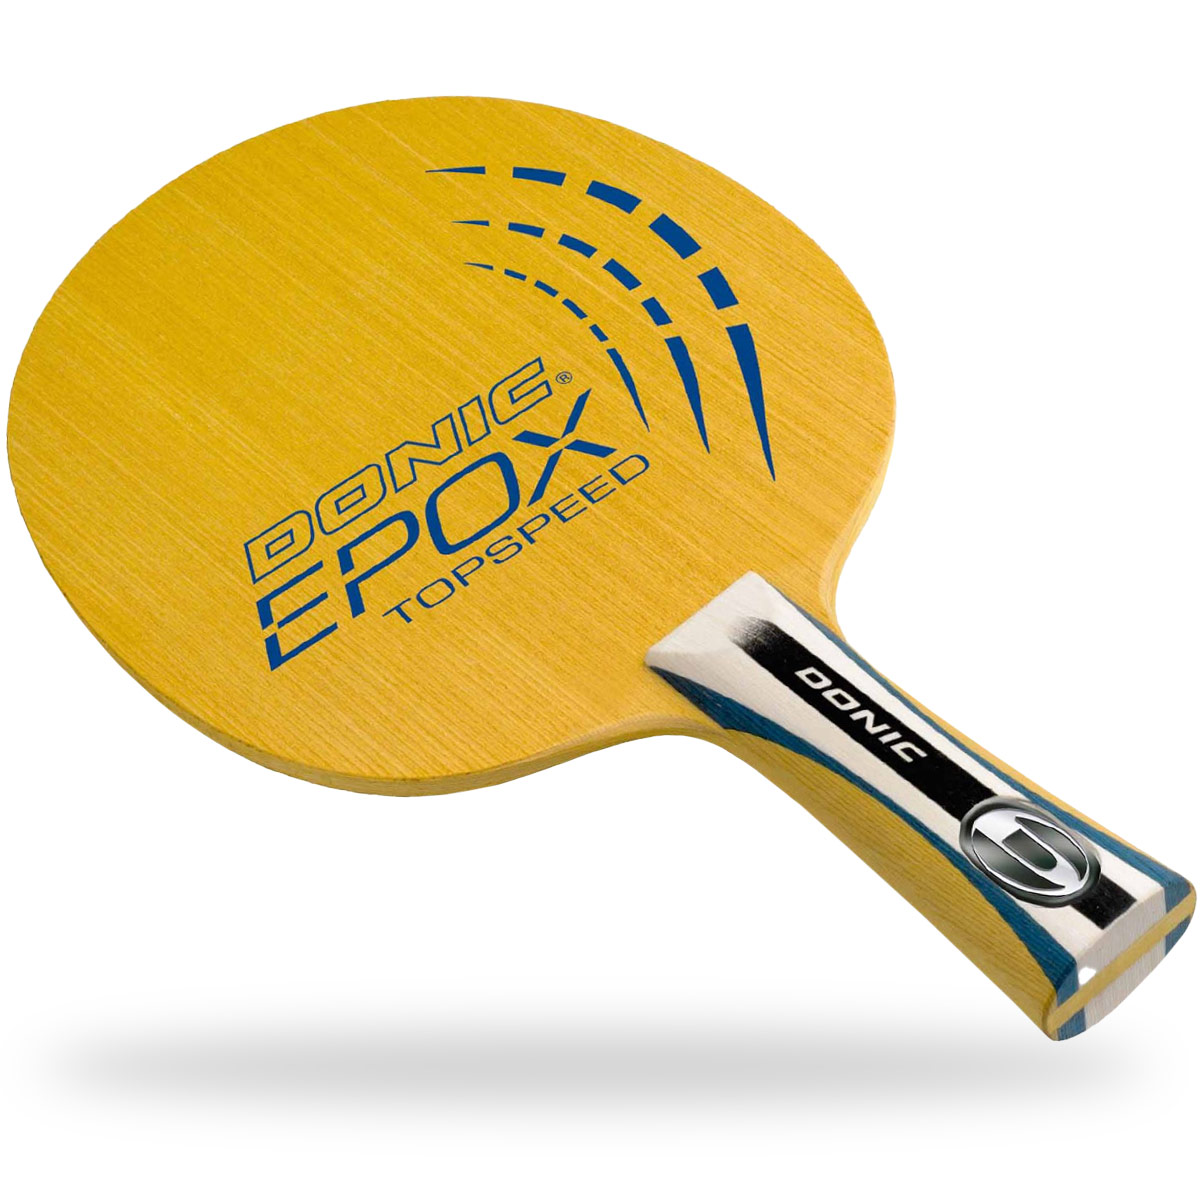 Donic Blade Epox Topspeed  flared